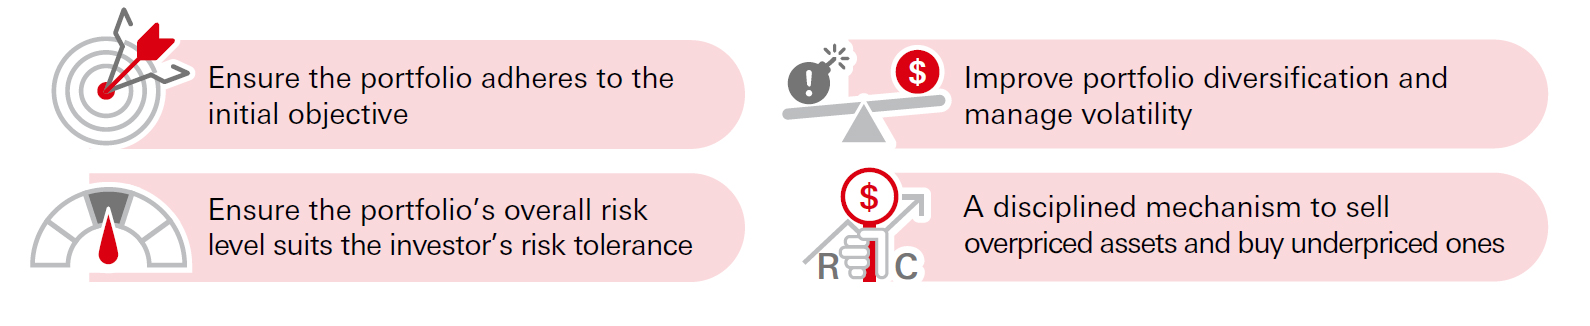 Each asset class has its distinct risk characteristics (e.g., equities usually involve higher risk and potential returns than bonds). Hence, when a portfolio’s asset weightings deviate from the original arrangement, the portfolio’s overall risk profile will change accordingly. By restoring the asset allocation to the initial setting, there are four major advantages:
